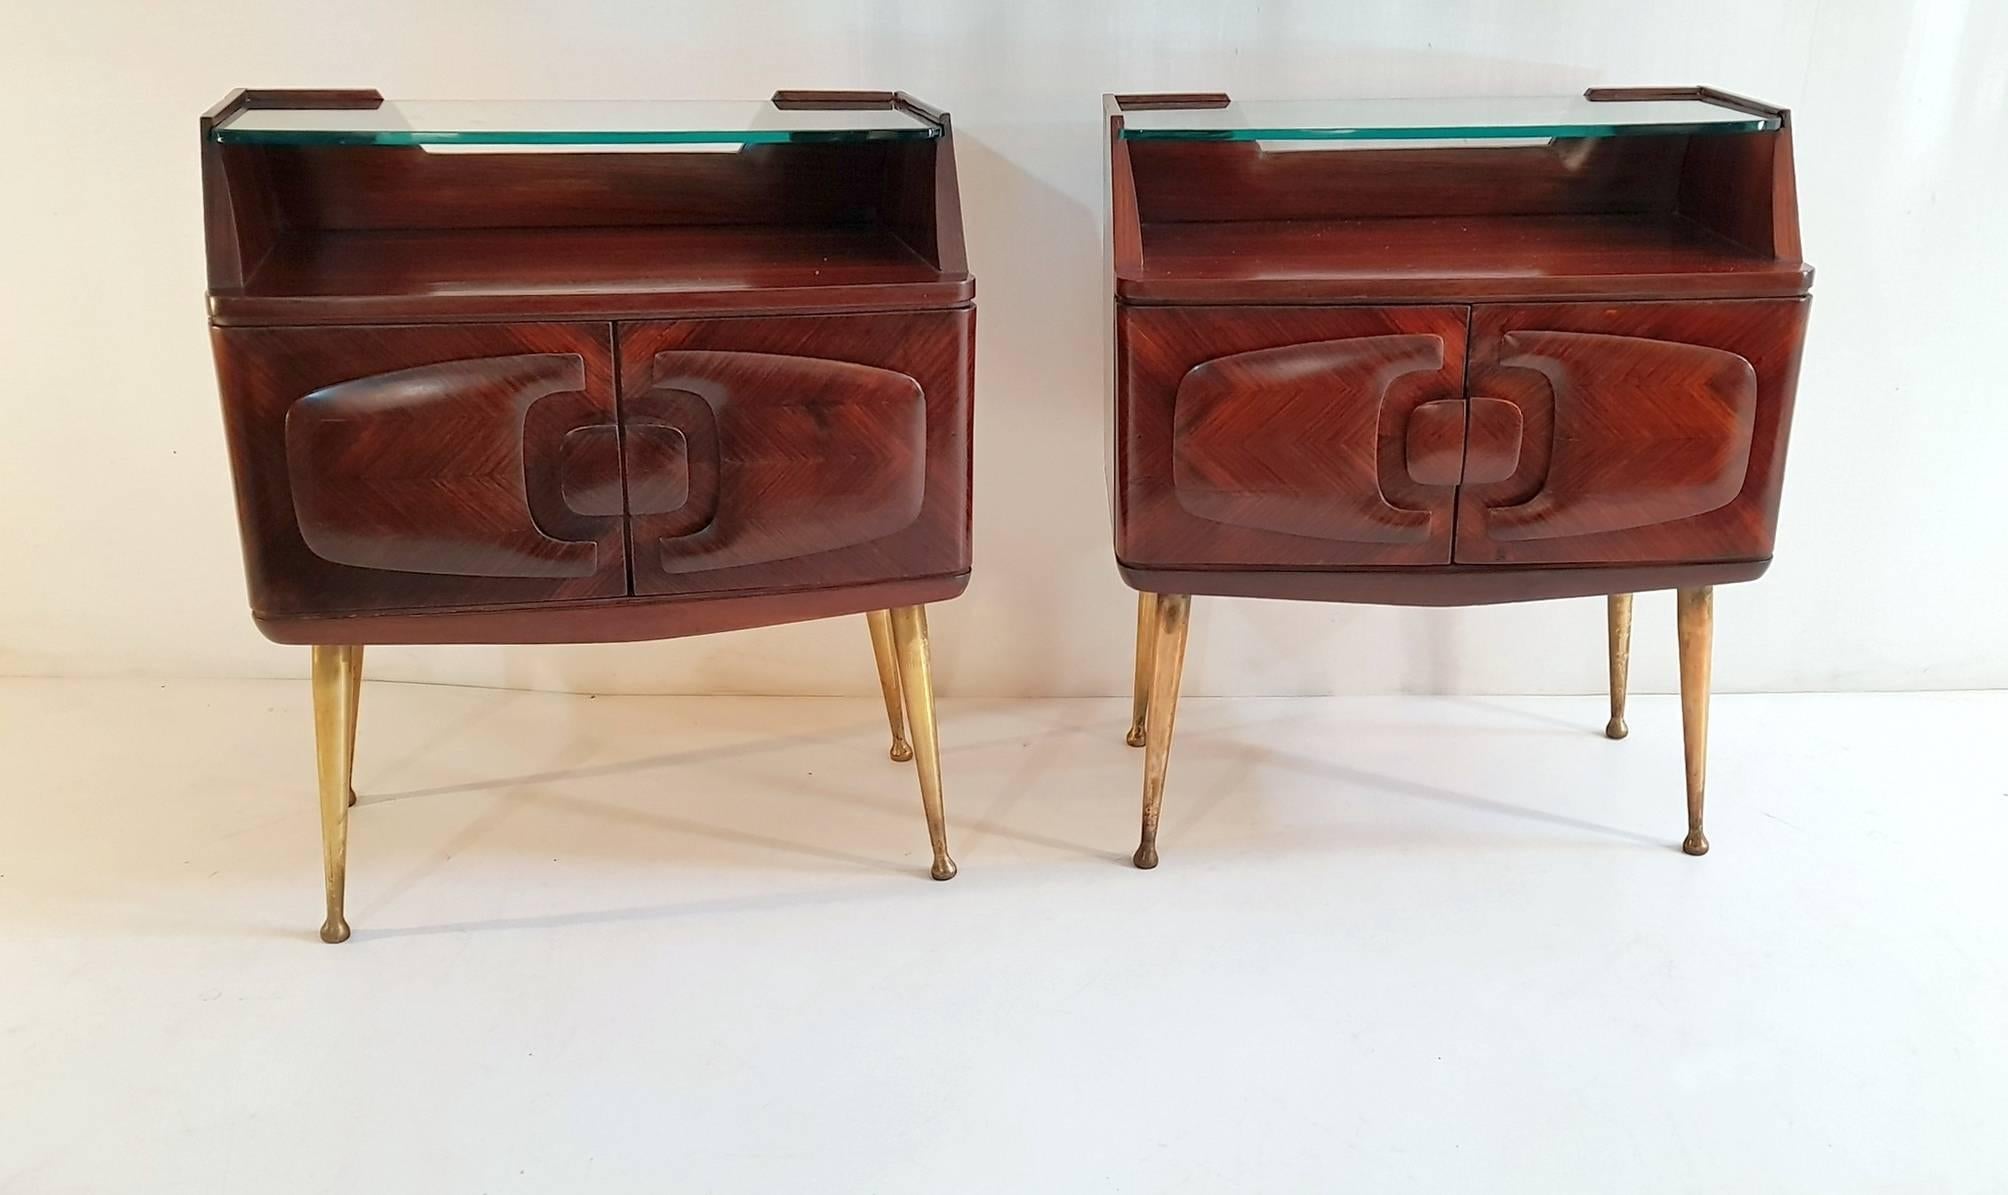 A pair of nightstands by Vittorio Dassi for his own company Dassi Lissone in jacaranda and with spider brass legs. Each nightstand has a pair of doors with an intricate design and glass shelf and details in brass. In excellent restored condition.